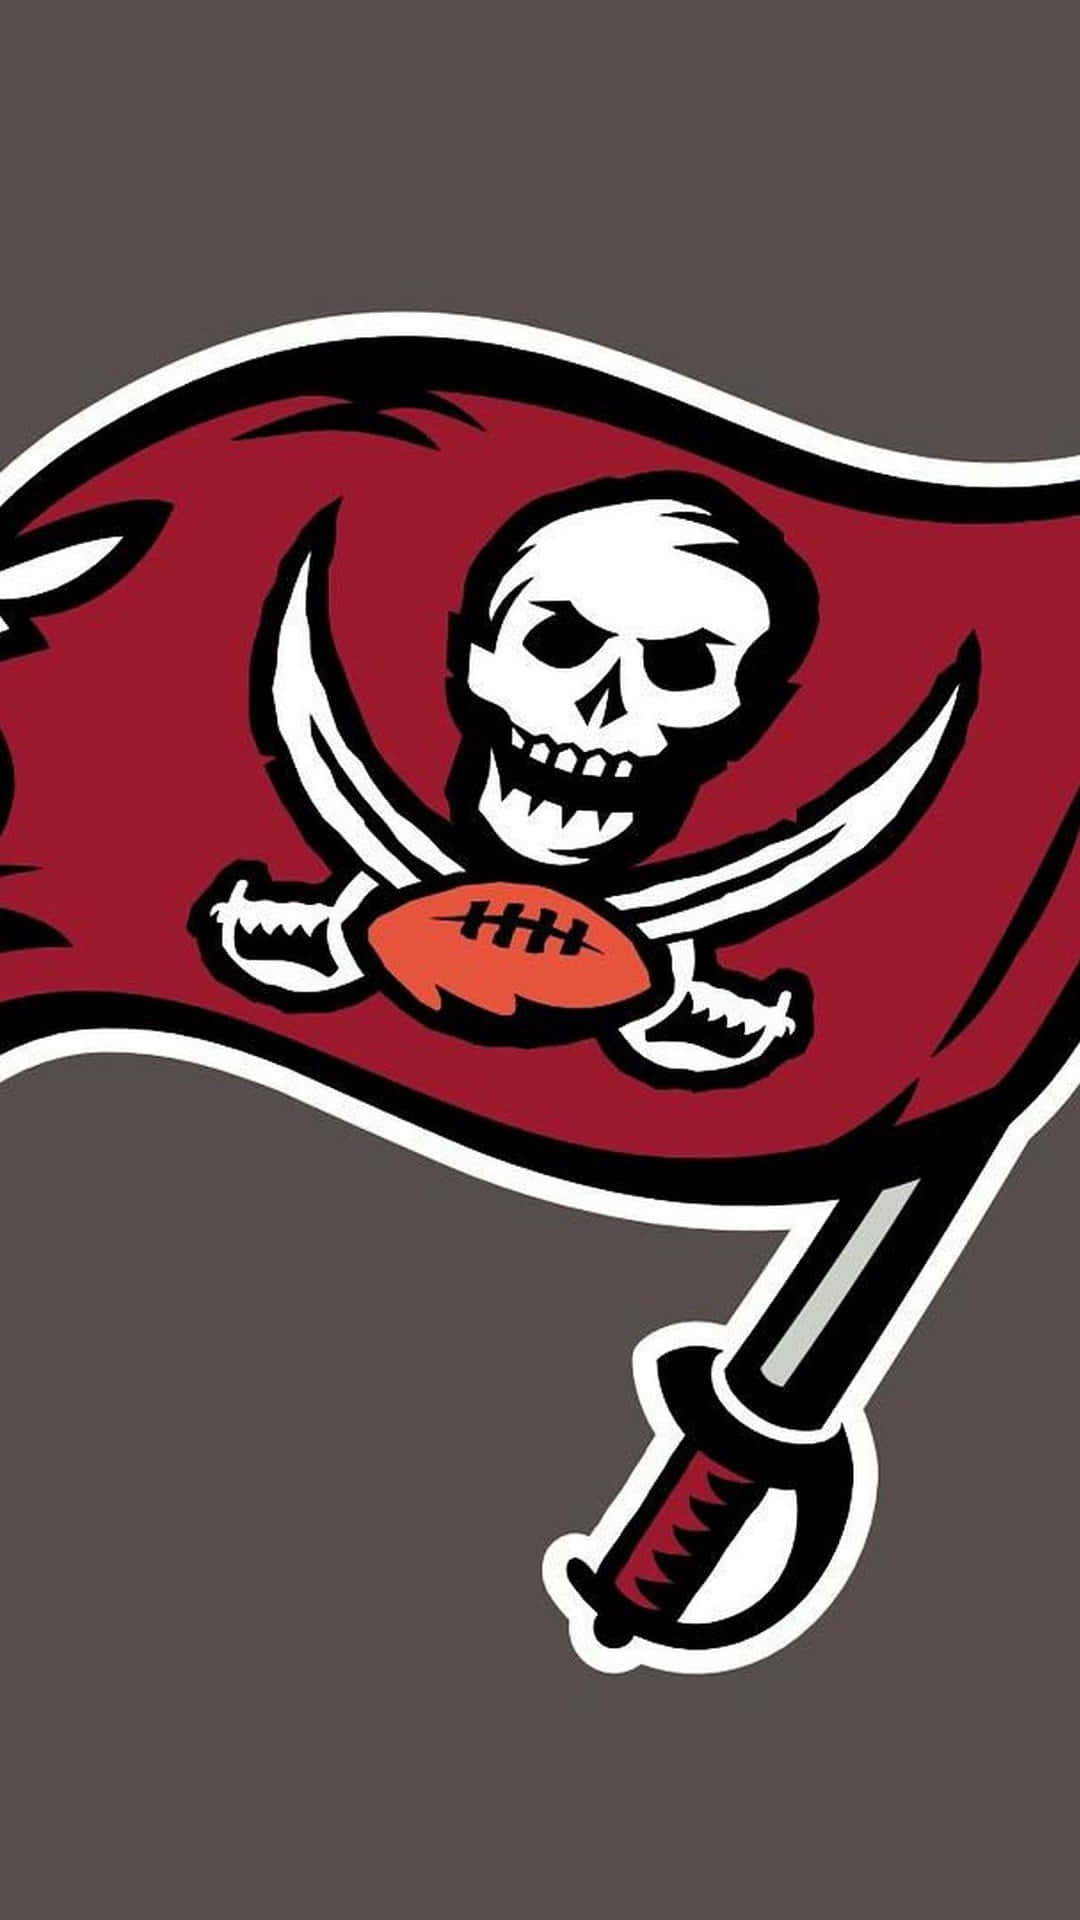 Show off your Tampa Bay Buccaneers pride with this custom iPhone wallpaper Wallpaper